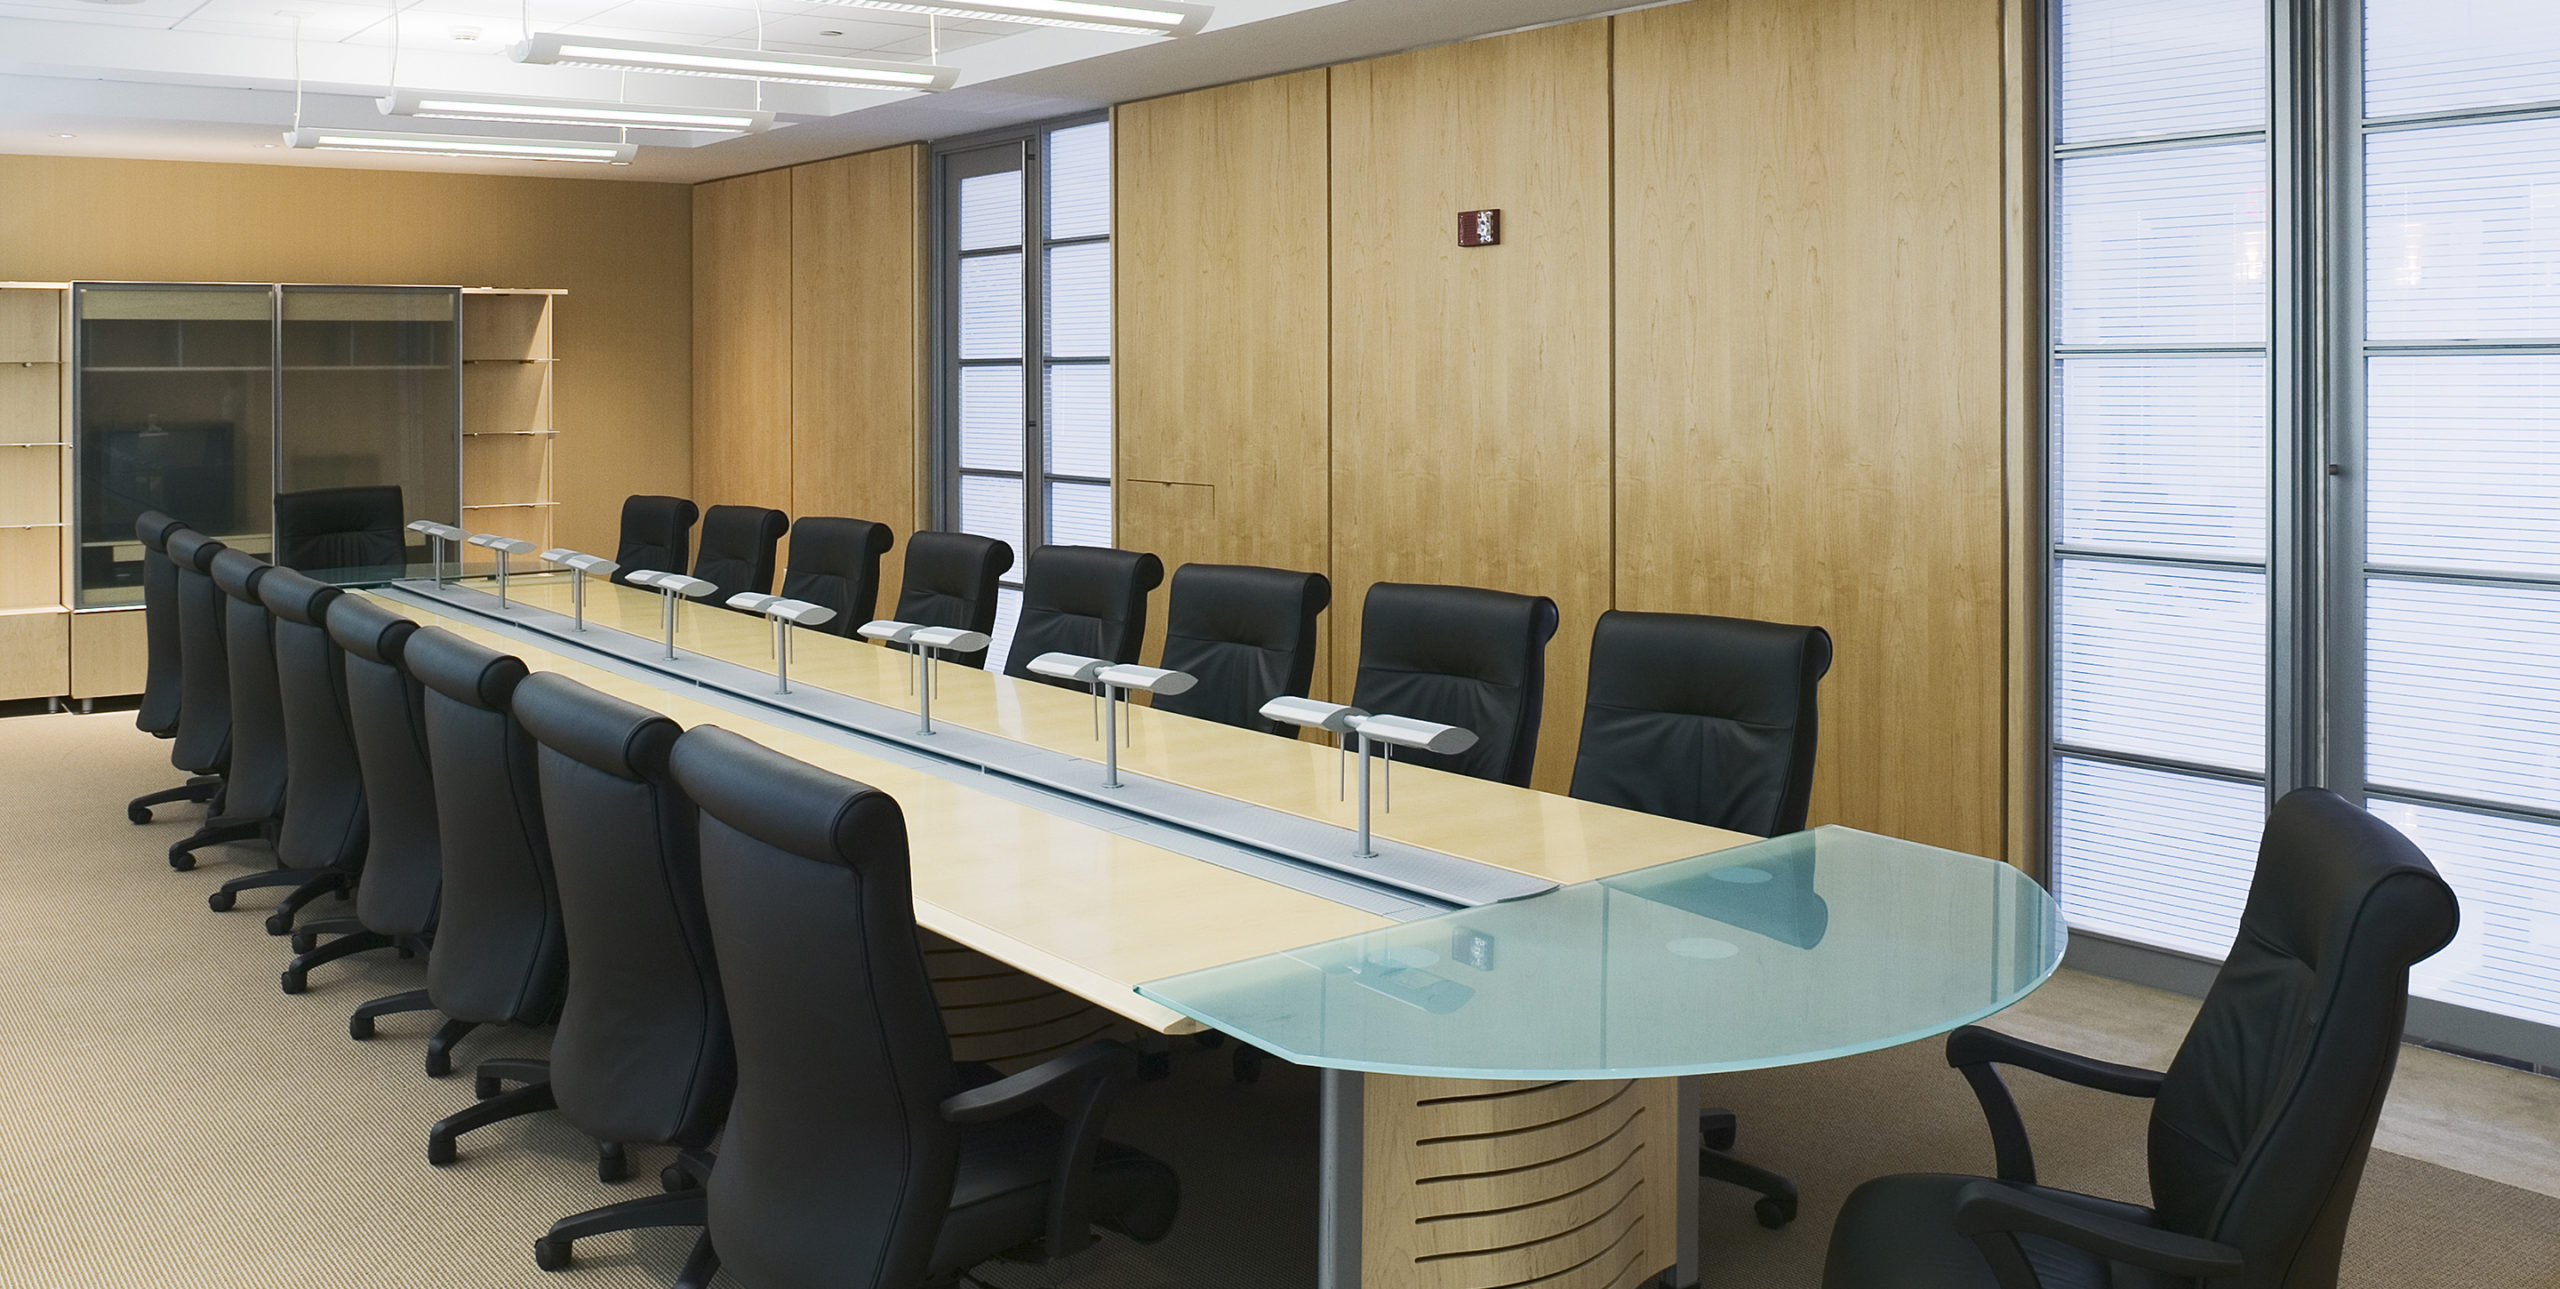 Conference room with 18 chairs at First Empire Securities at 100 Motor Parkway, Hauppauge